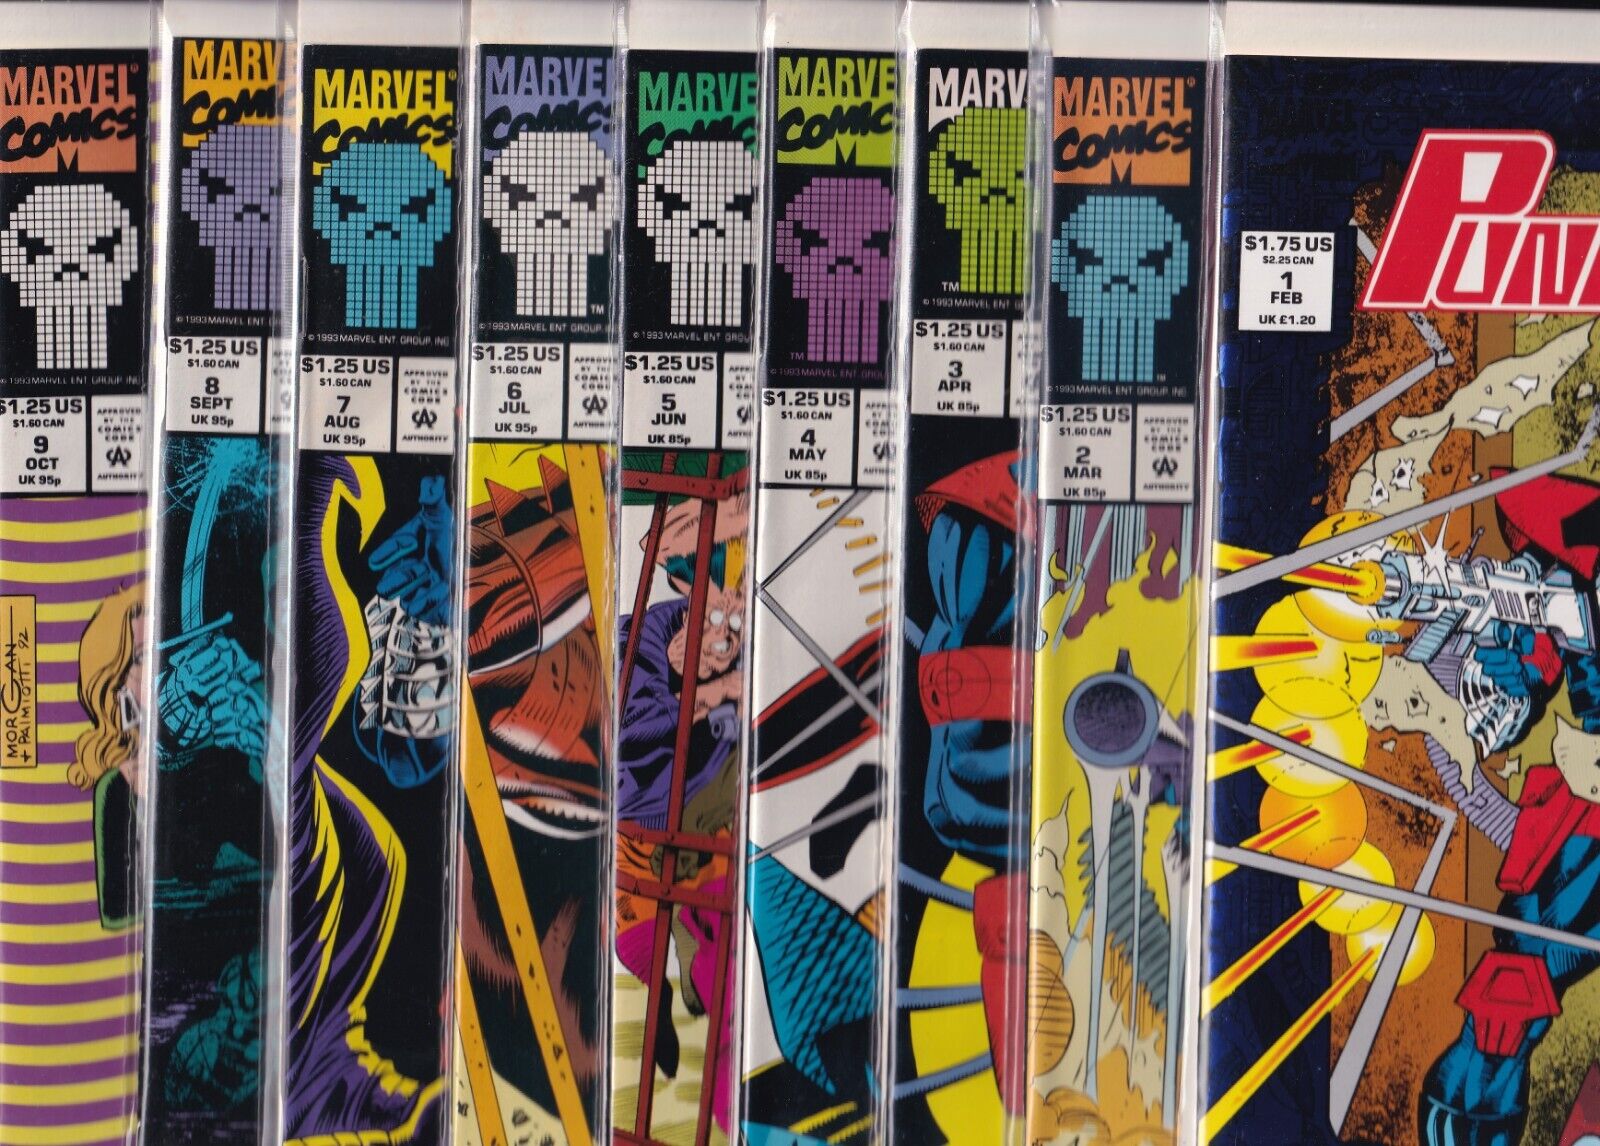 The Punisher 2099 (Jake Gallows) Issues #1-9 (Marvel Comics, 1993) Pat Mills